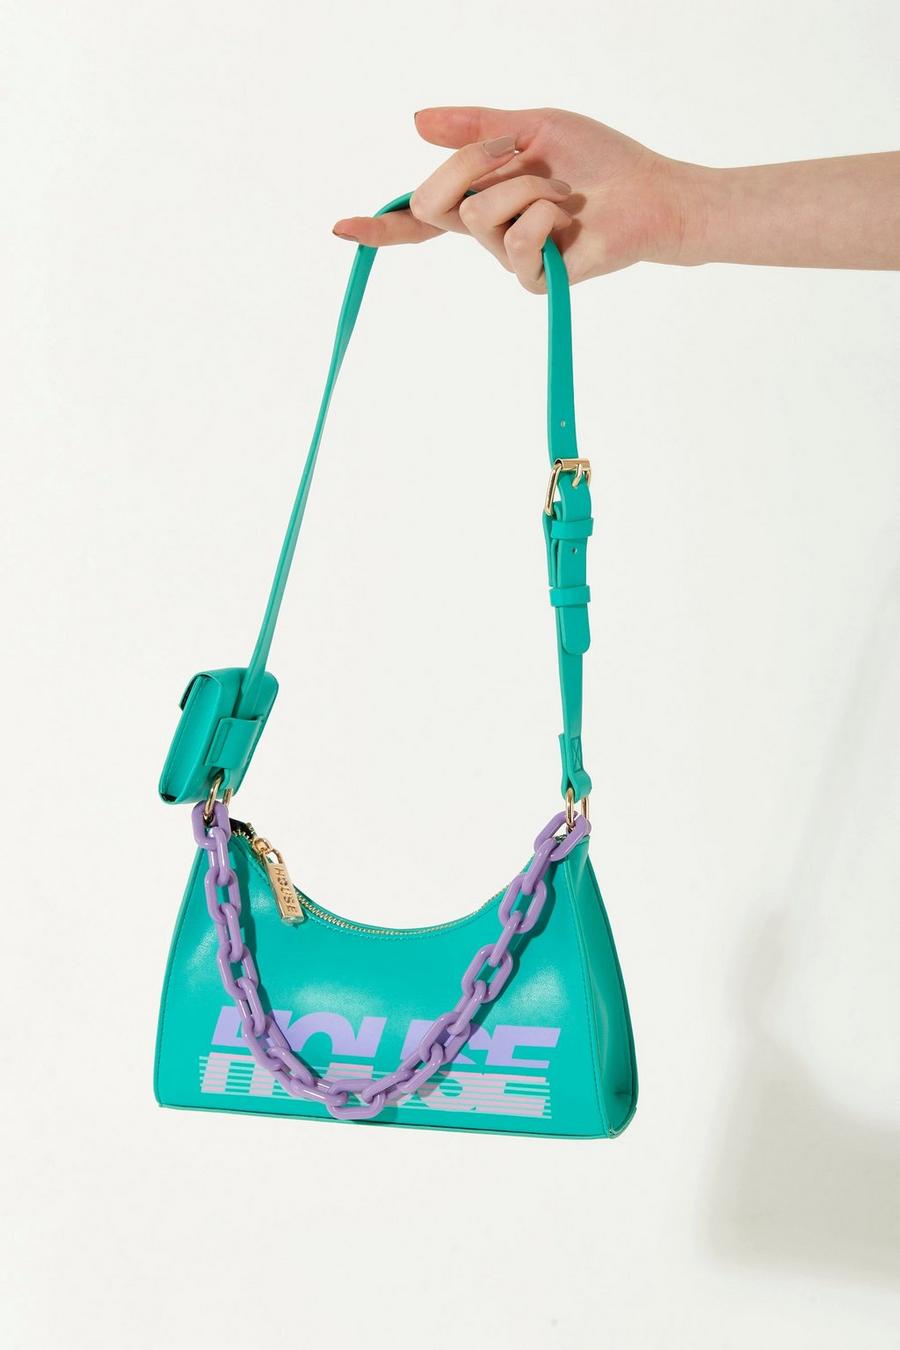 Green Shoulder Bag In Turquoise With ‘House’ Print